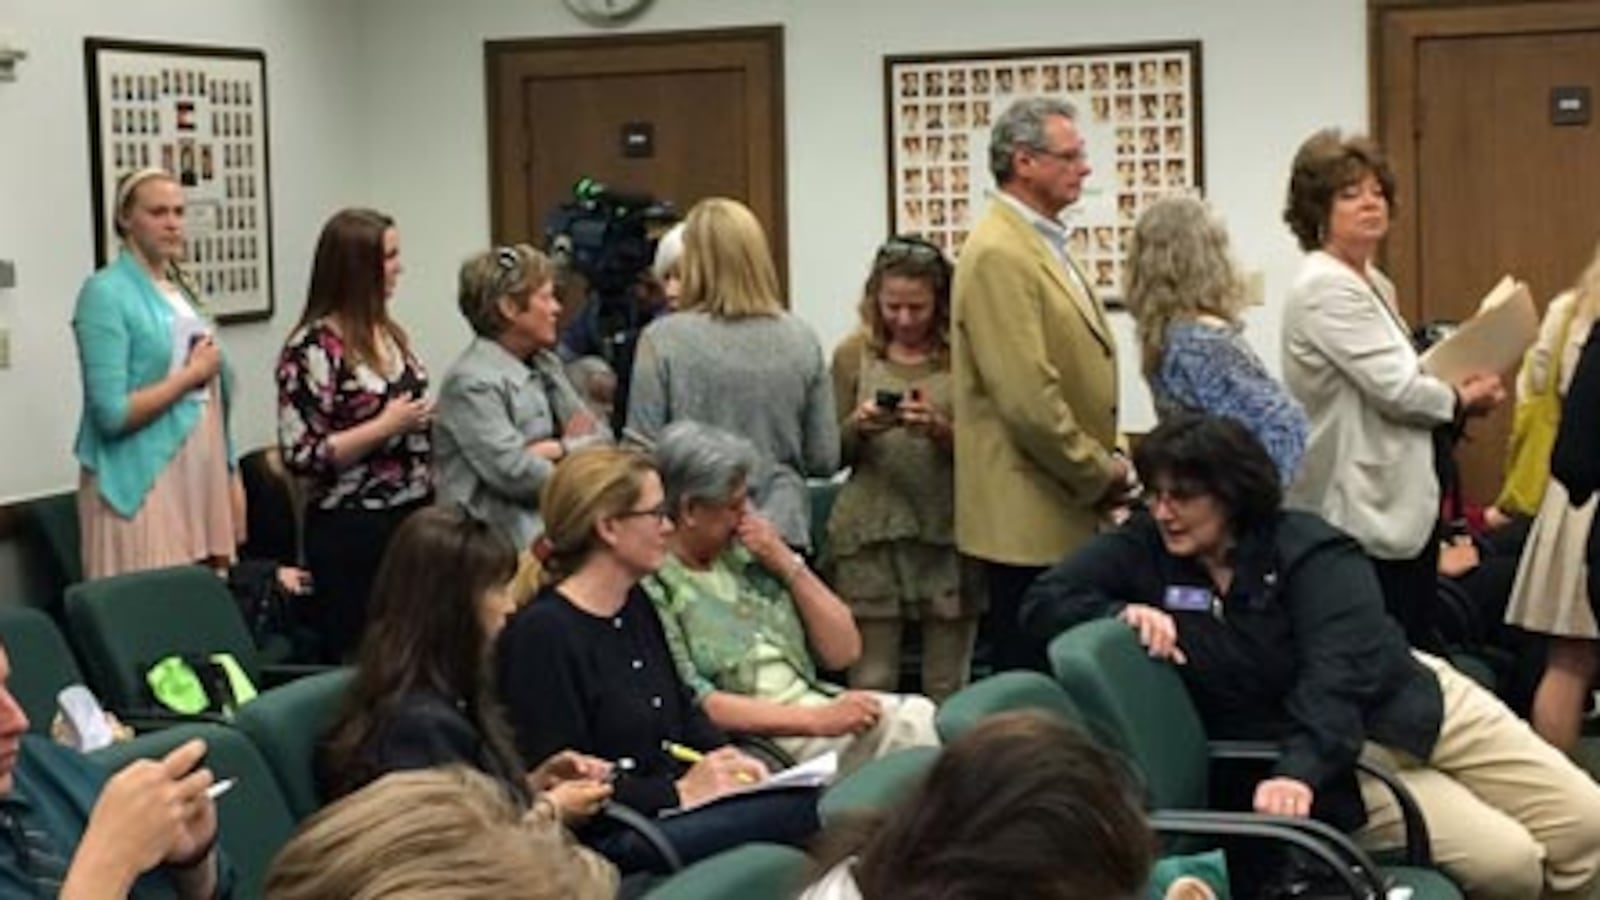 A long line of people signed up to testify at the House Education Committee Wednesday, but most didn't get to speak because a key bill was delayed,